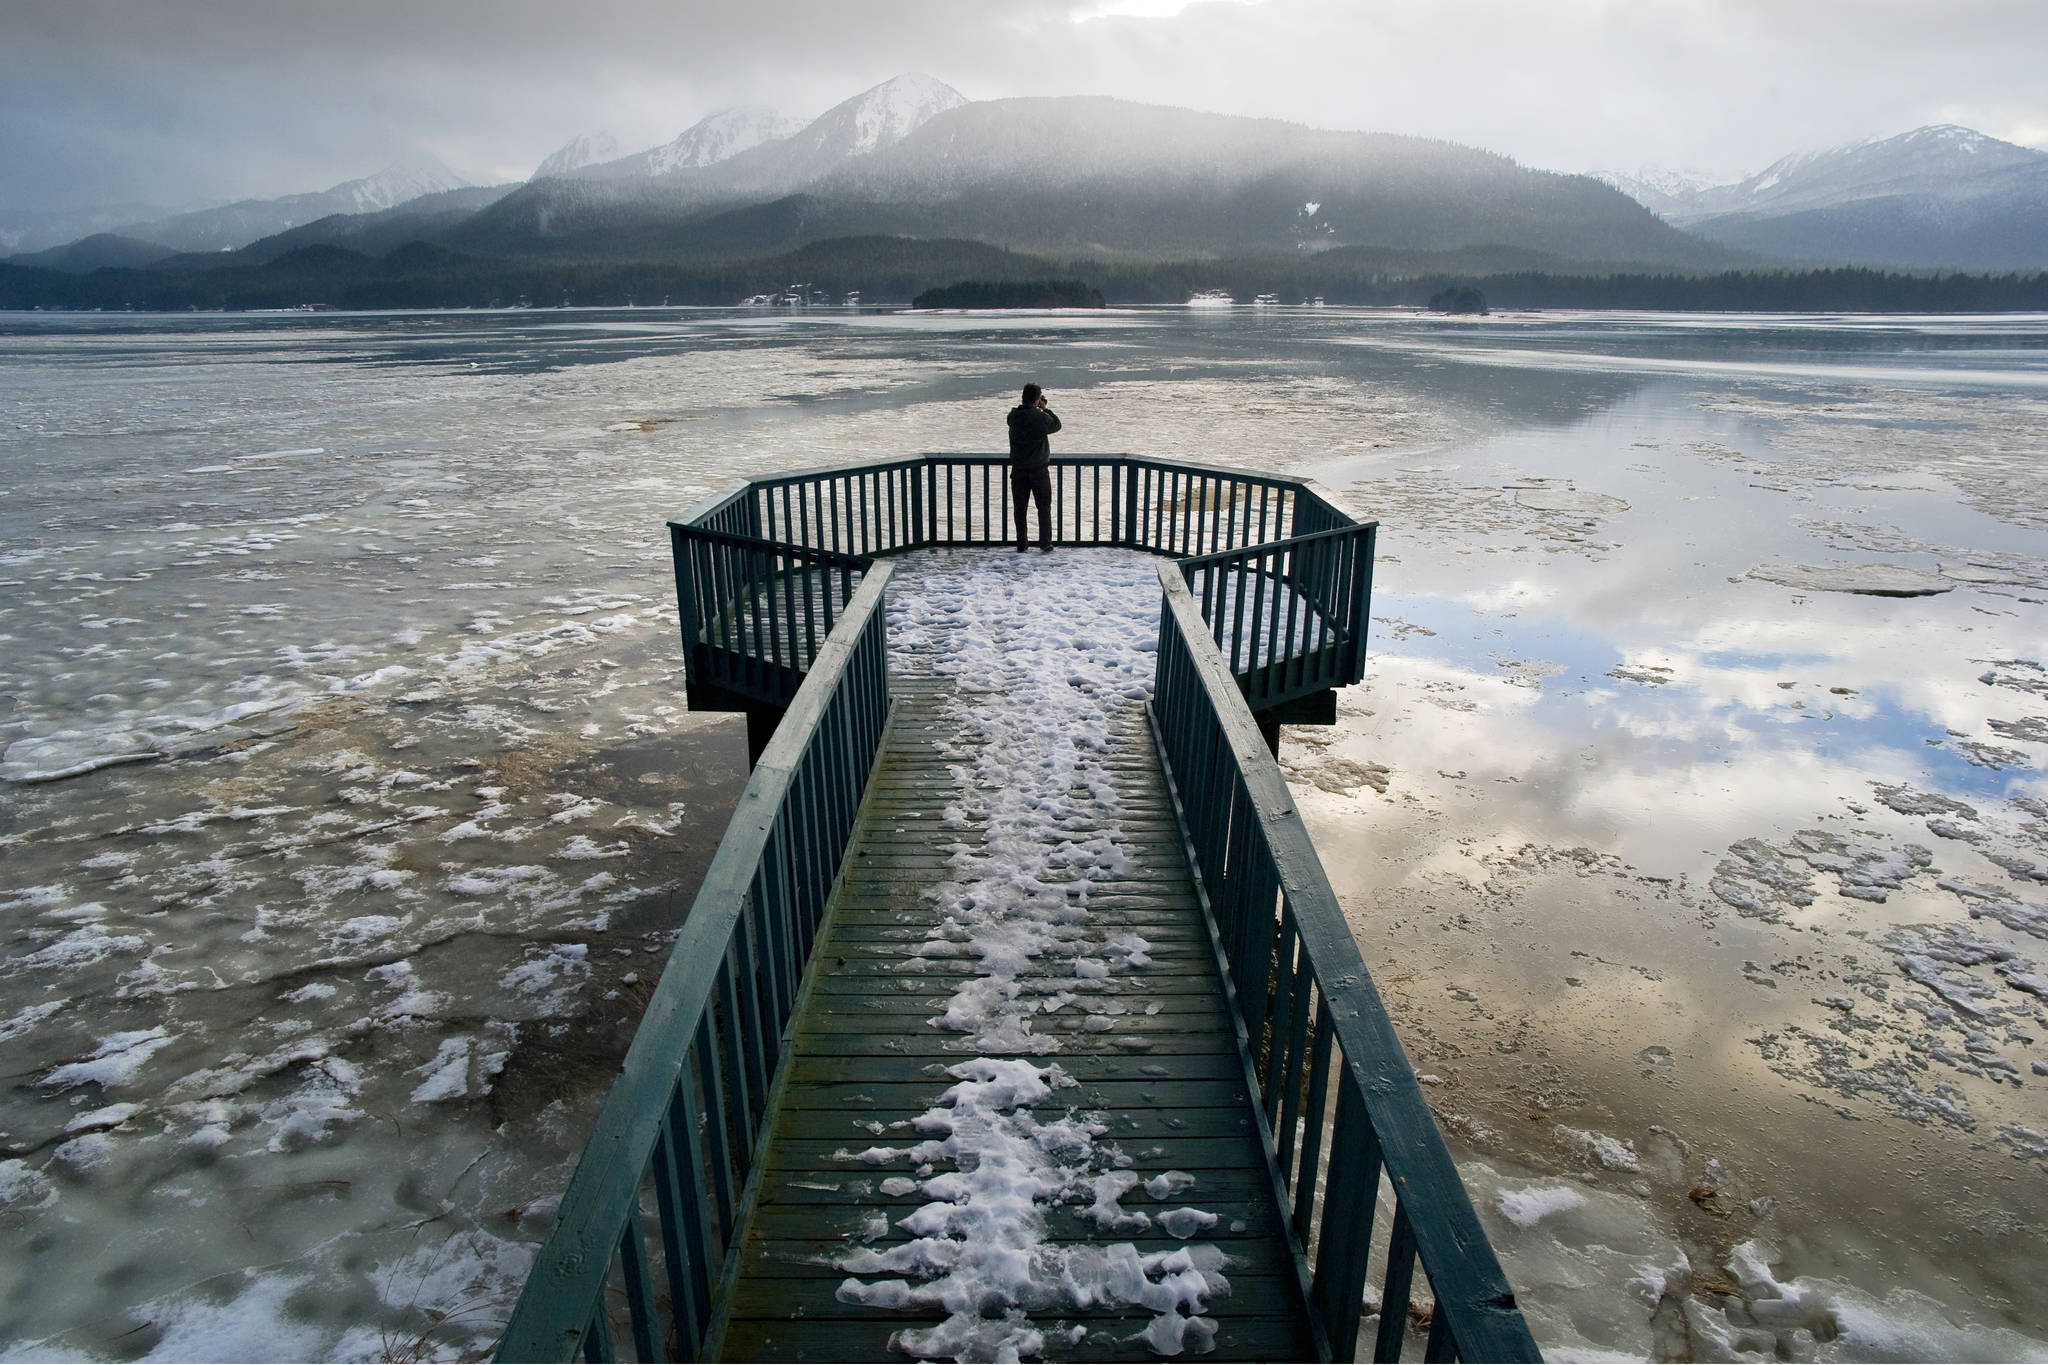 In this Empire file photo from 2012, Laurent Dick photographs the Mendenhall Wetlands State Game Refuge. A professor who studies coastal zone management will give a talk today at the University of Alaska Southeast. (Michael Penn | Juneau Empire)